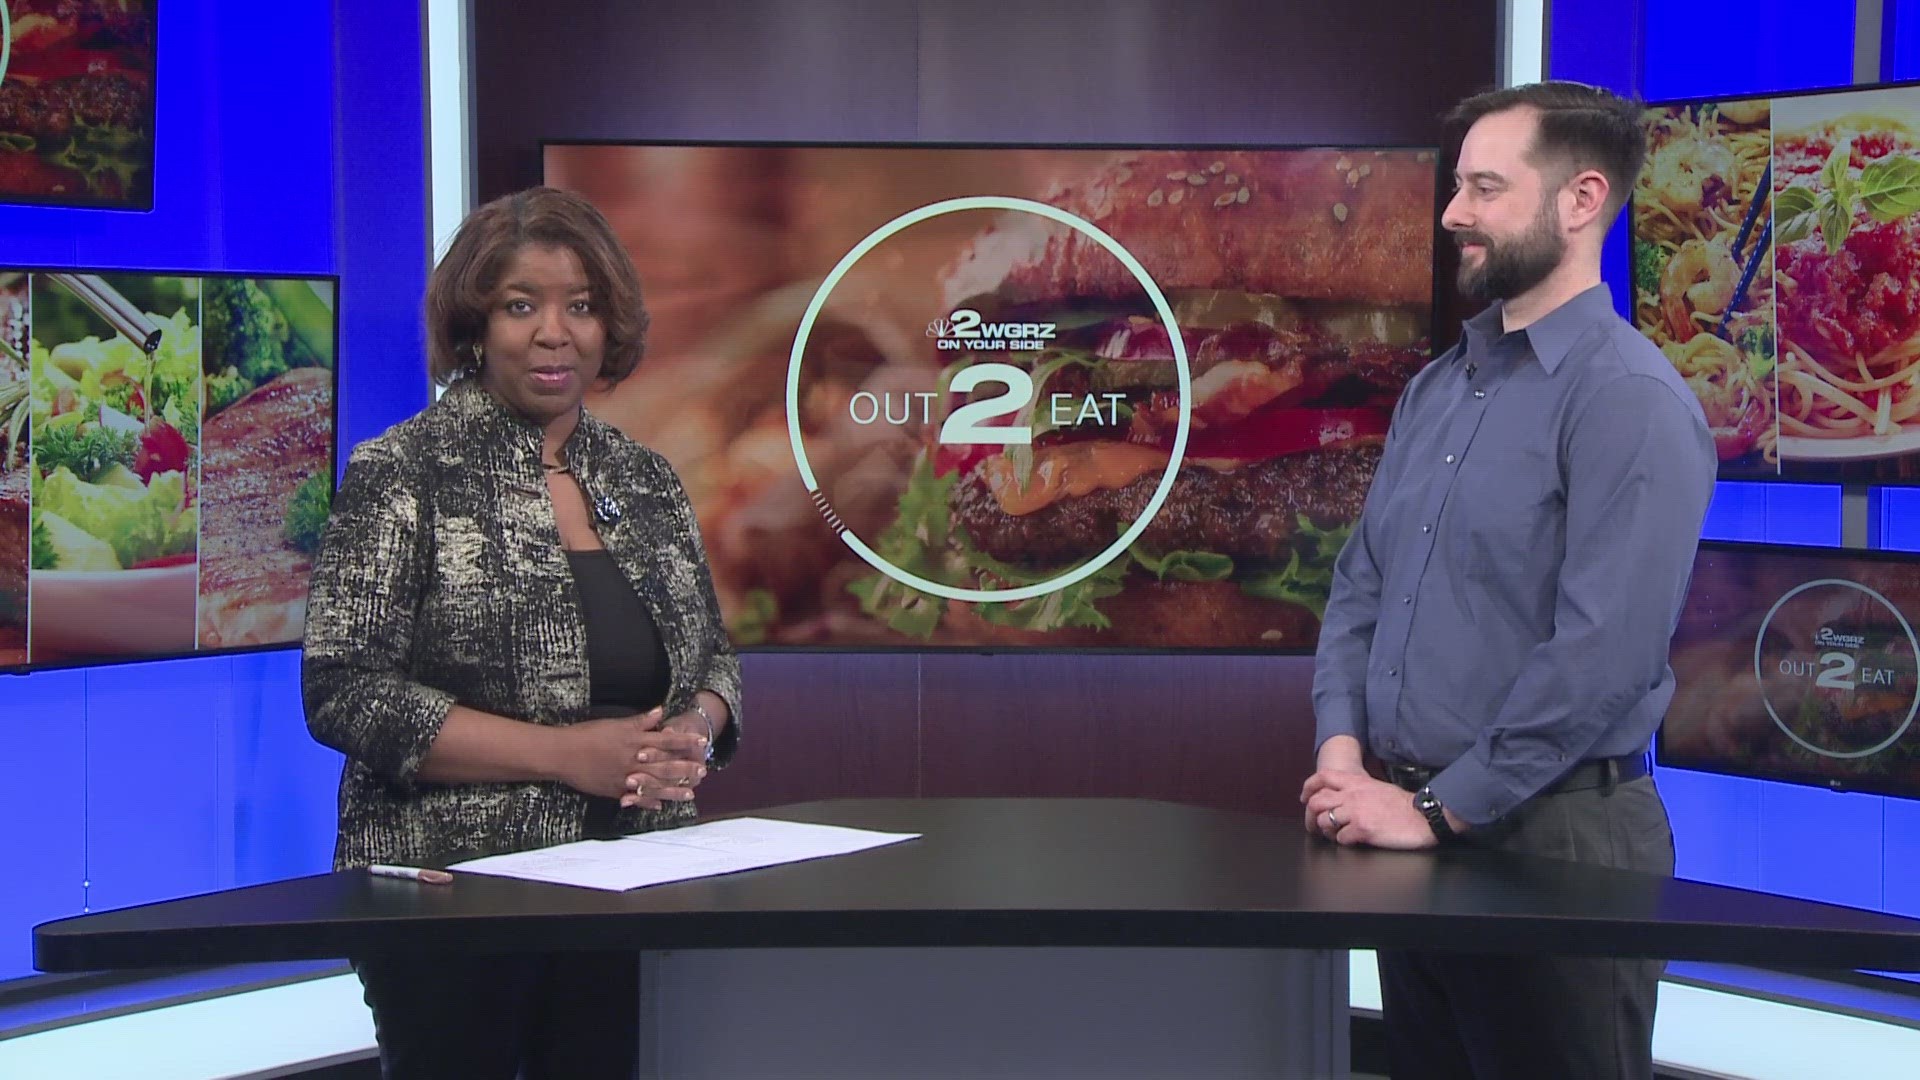 The chair of the Village of Lancaster's 175th Anniversary Committee, Gavin O'Brien, discussed Lancaster Restaurant Week.